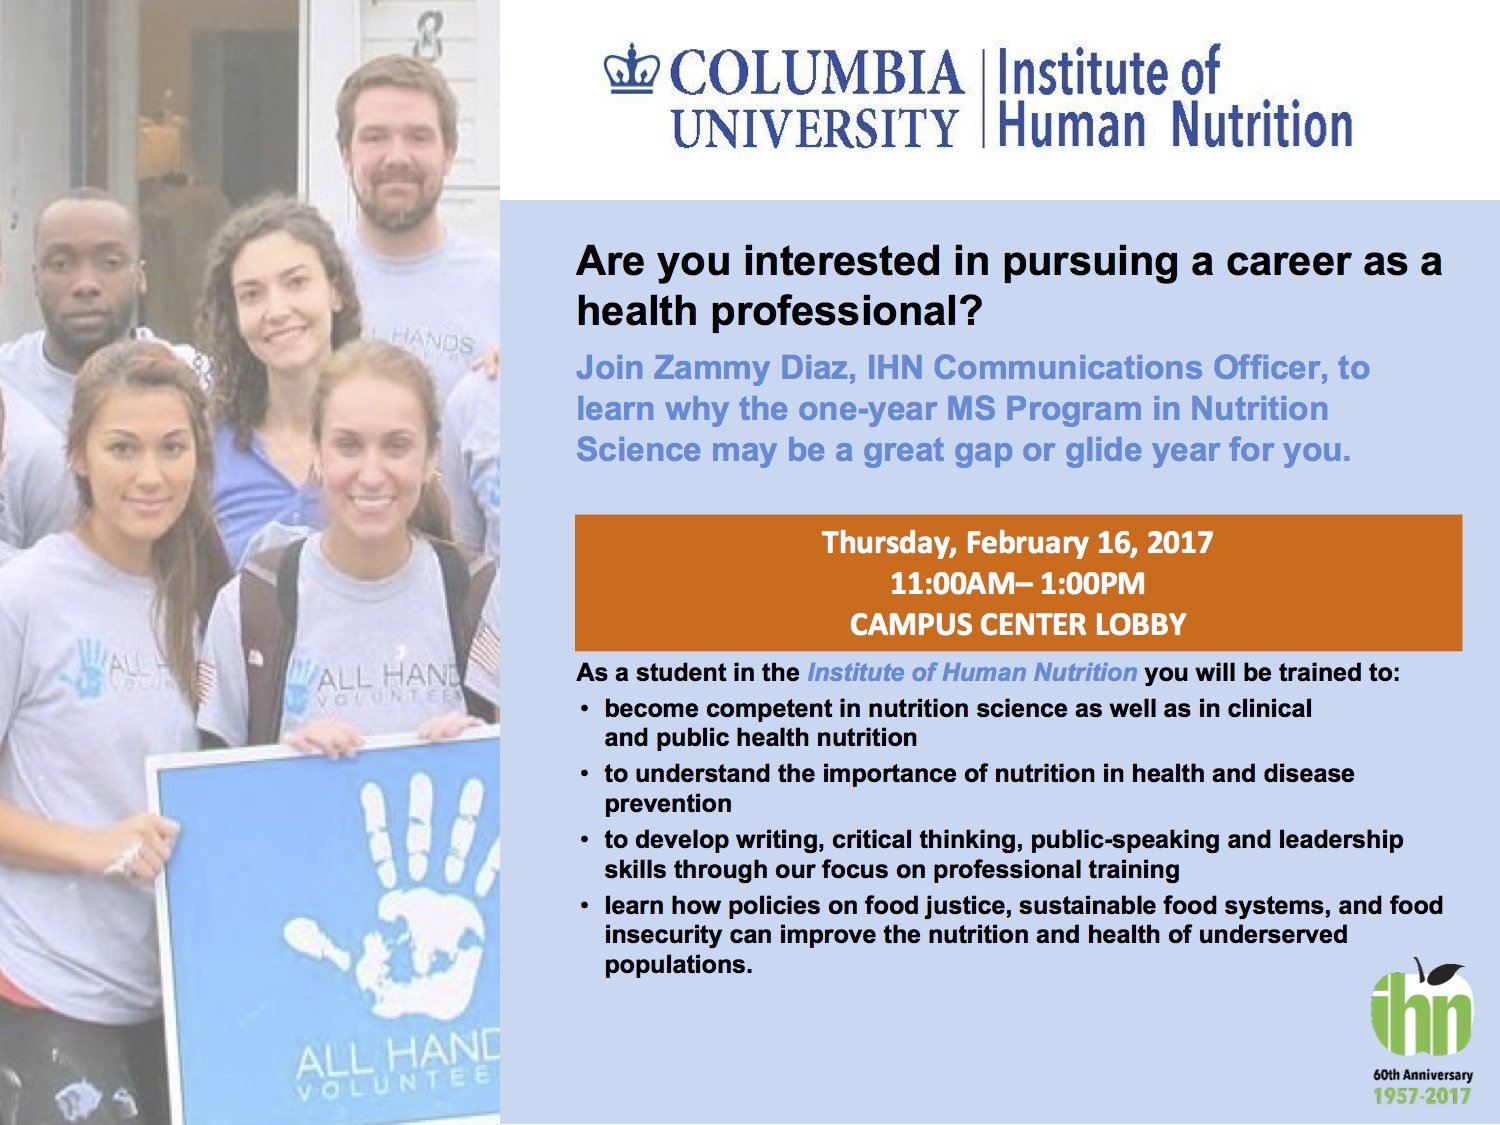 Are You Interested in Pursuing a Career as a Health Professional?